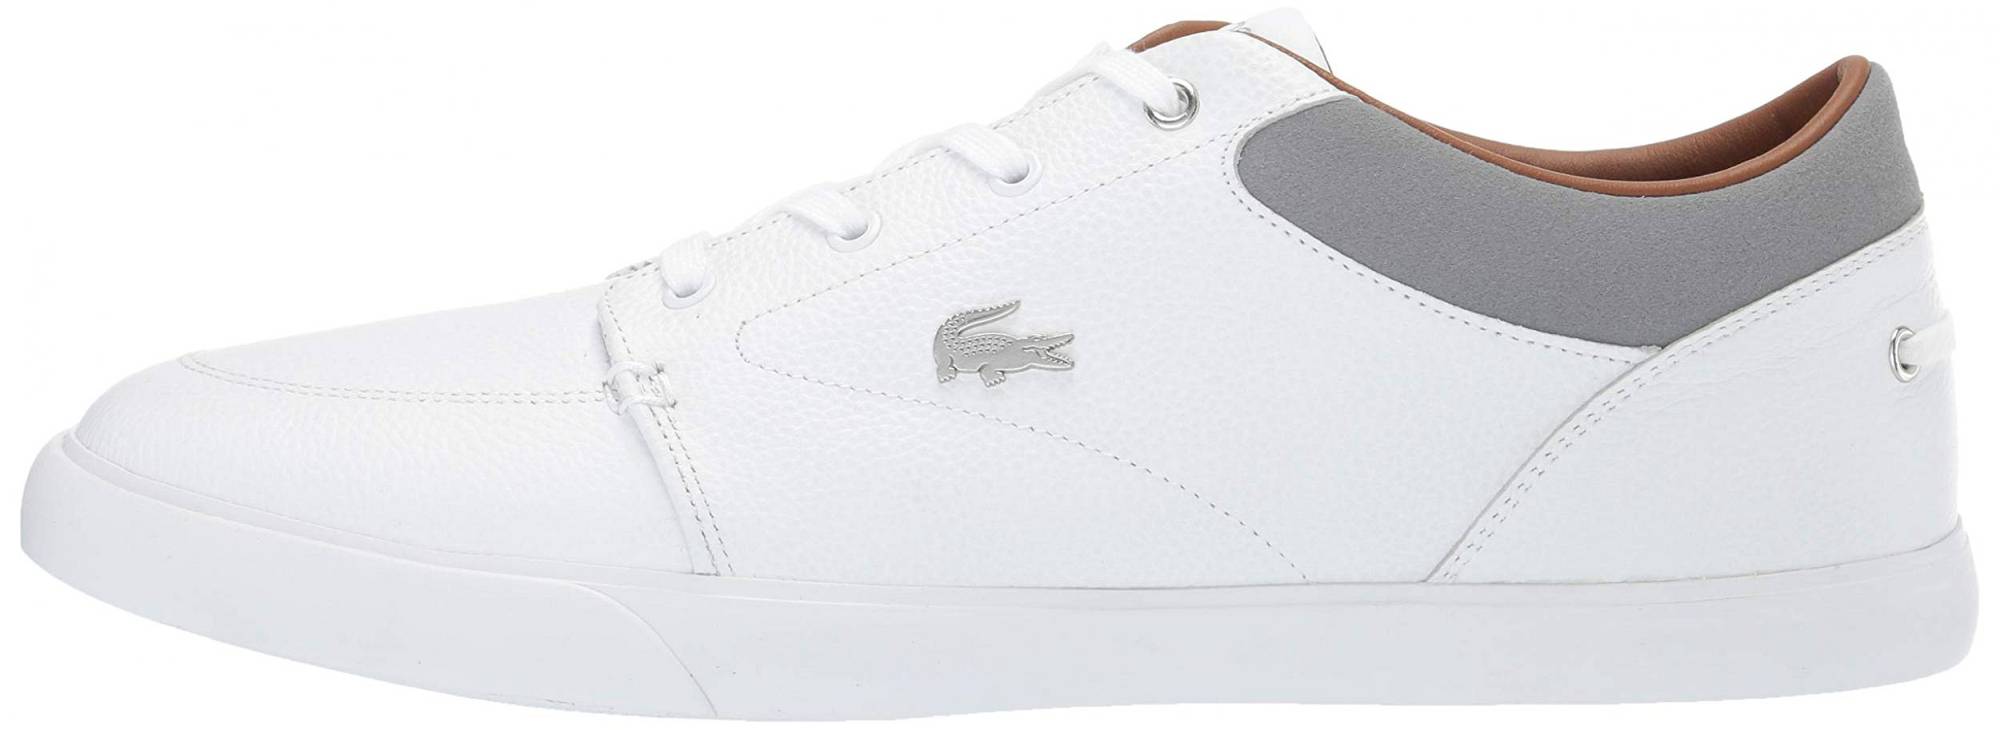 Lacoste Bayliss Sneaker – Shoes Reviews & Reasons To Buy